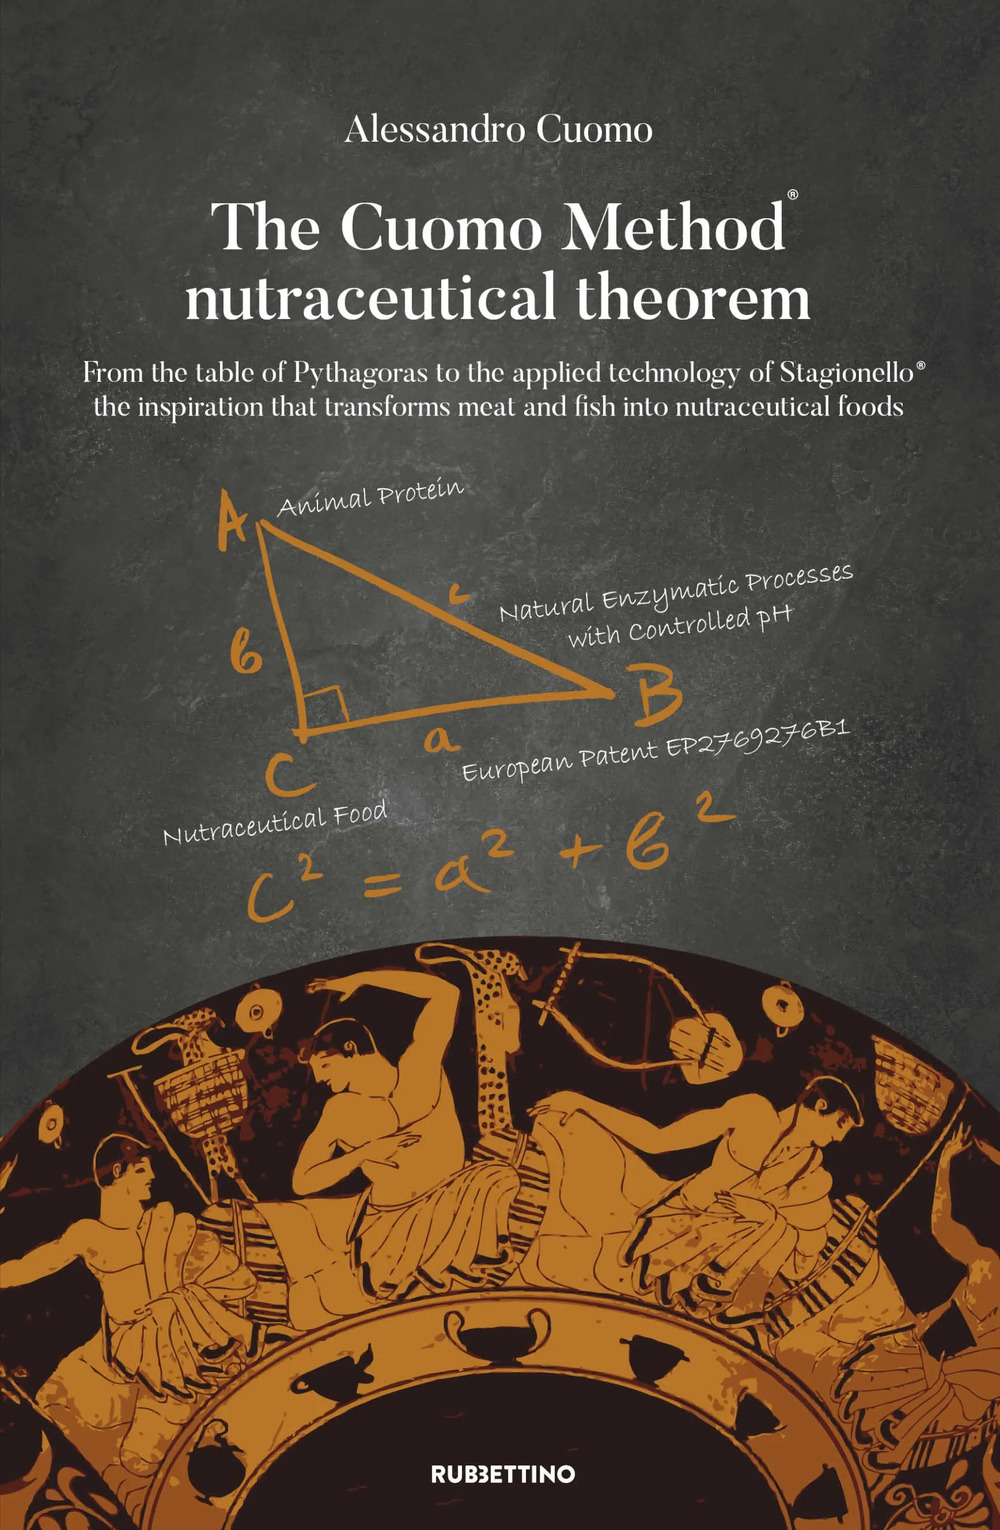 The Nutraceutical Theorem of the Cuomo Method®. From the table of Pythagoras to the applied technology of Stagionello® the inspiration that transforms meat and fish into nutraceutical foods